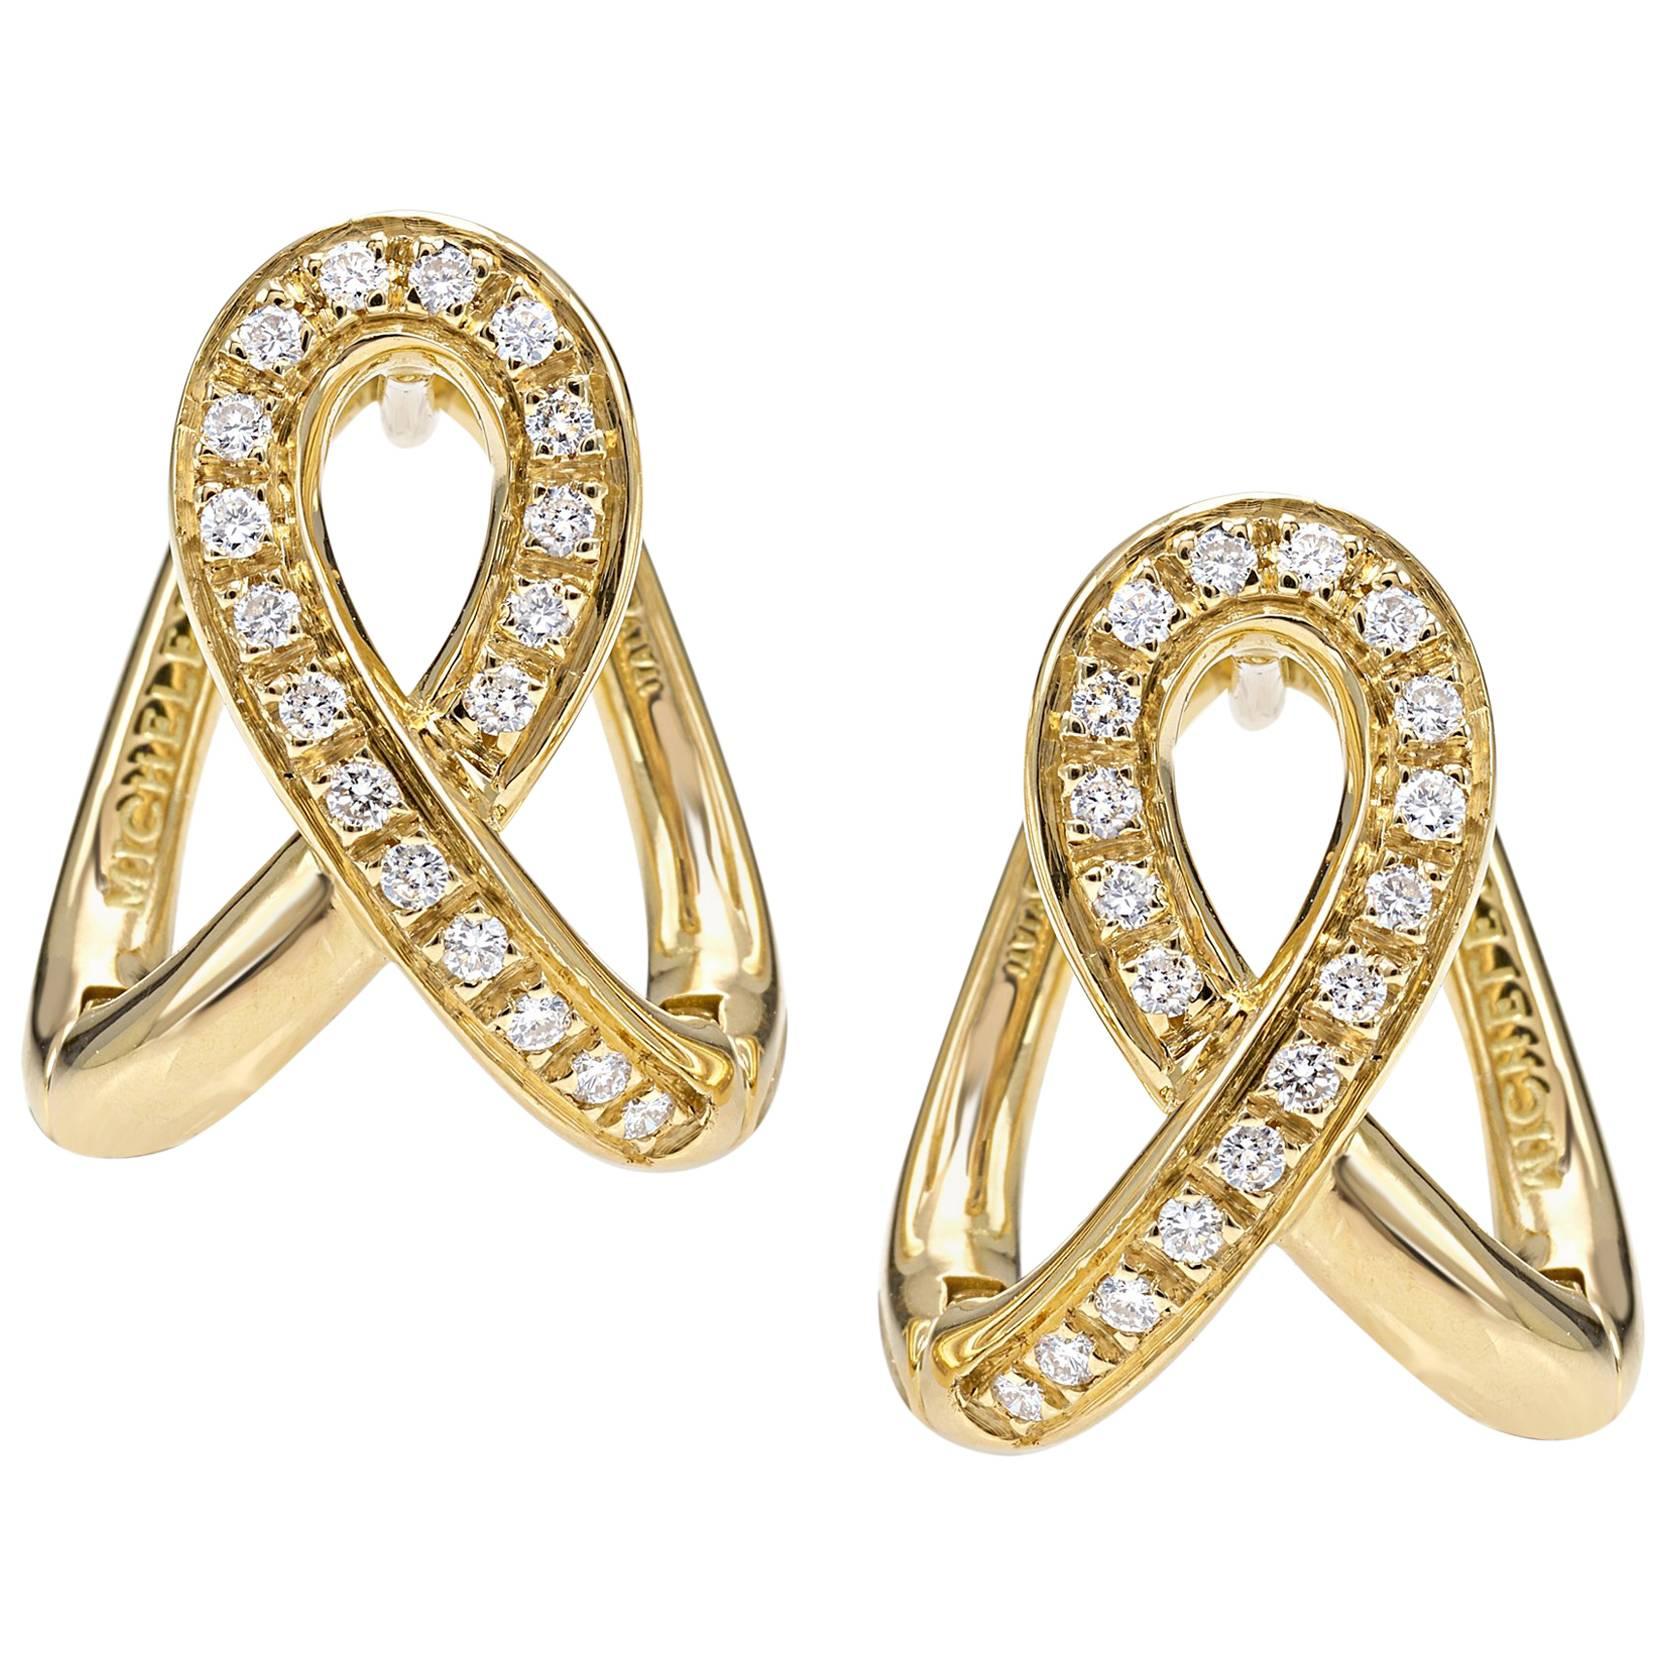 Earrings from the Collection "Essence" 18 Karat Yellow Gold and Diamonds